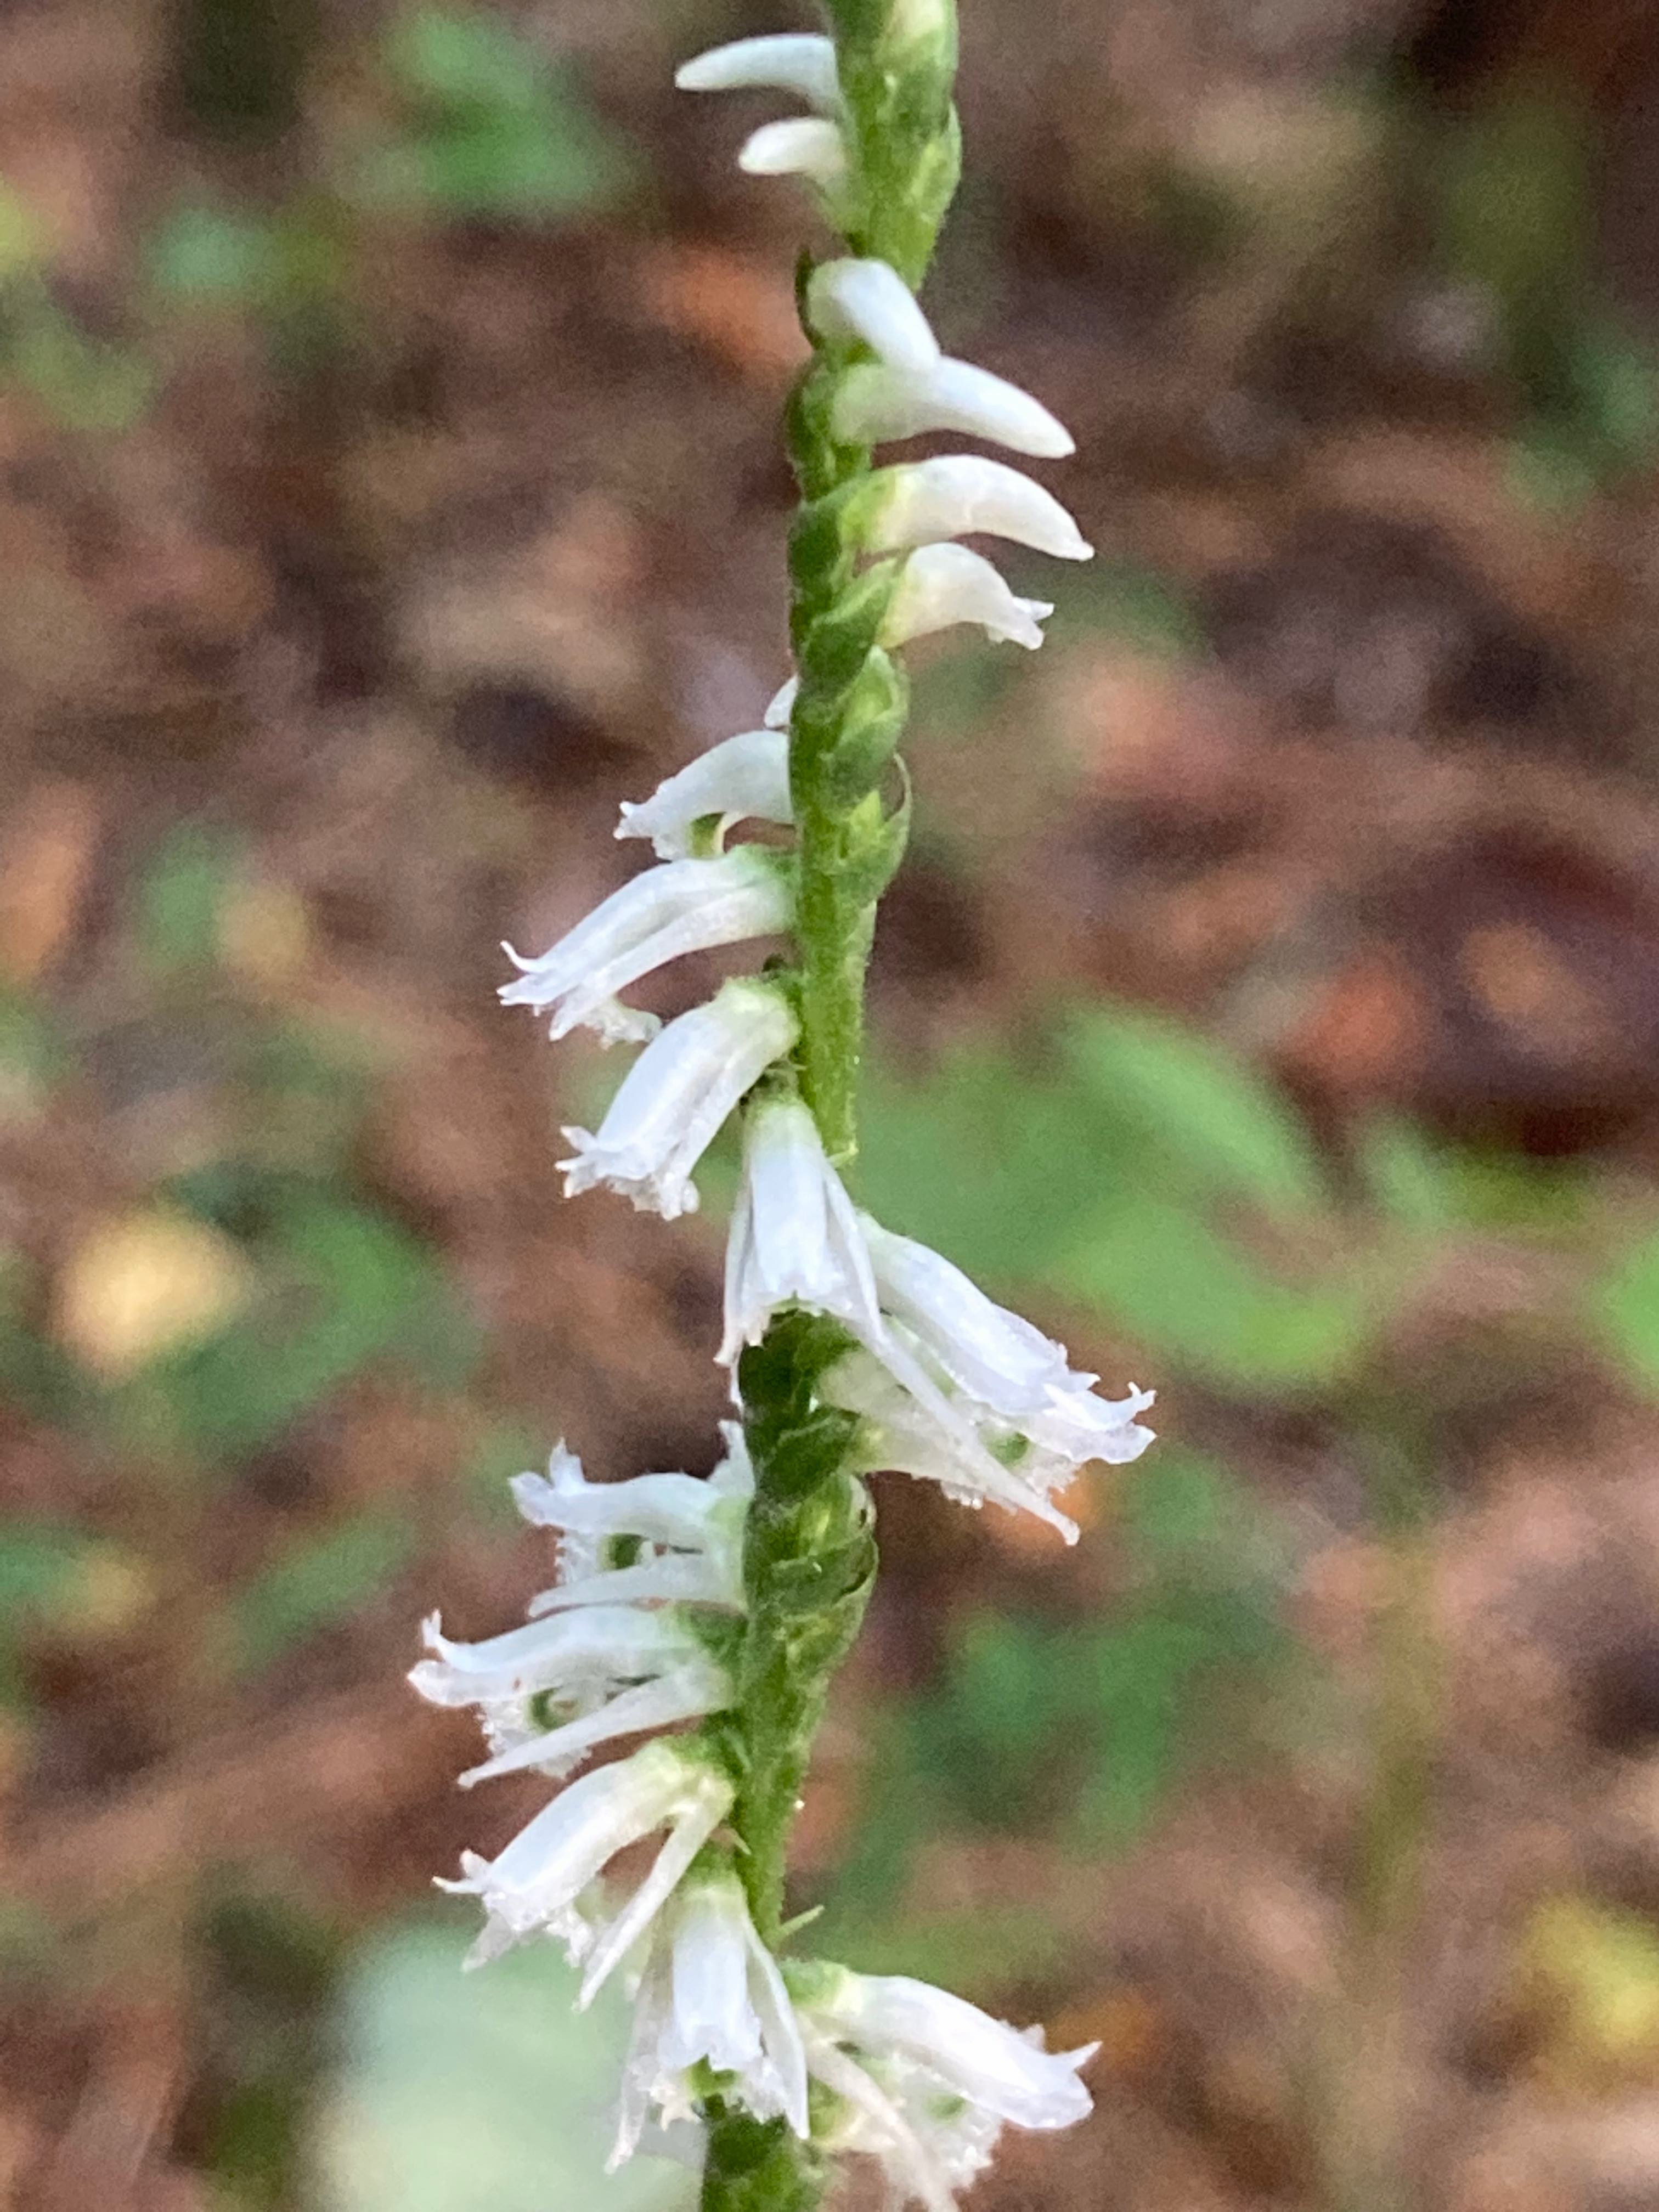 The Scientific Name is Spiranthes lacera var. gracilis. You will likely hear them called Southern Slender Ladies'-tresses, Ladies' Tresses. This picture shows the Flowers are strongly spiralled. of Spiranthes lacera var. gracilis